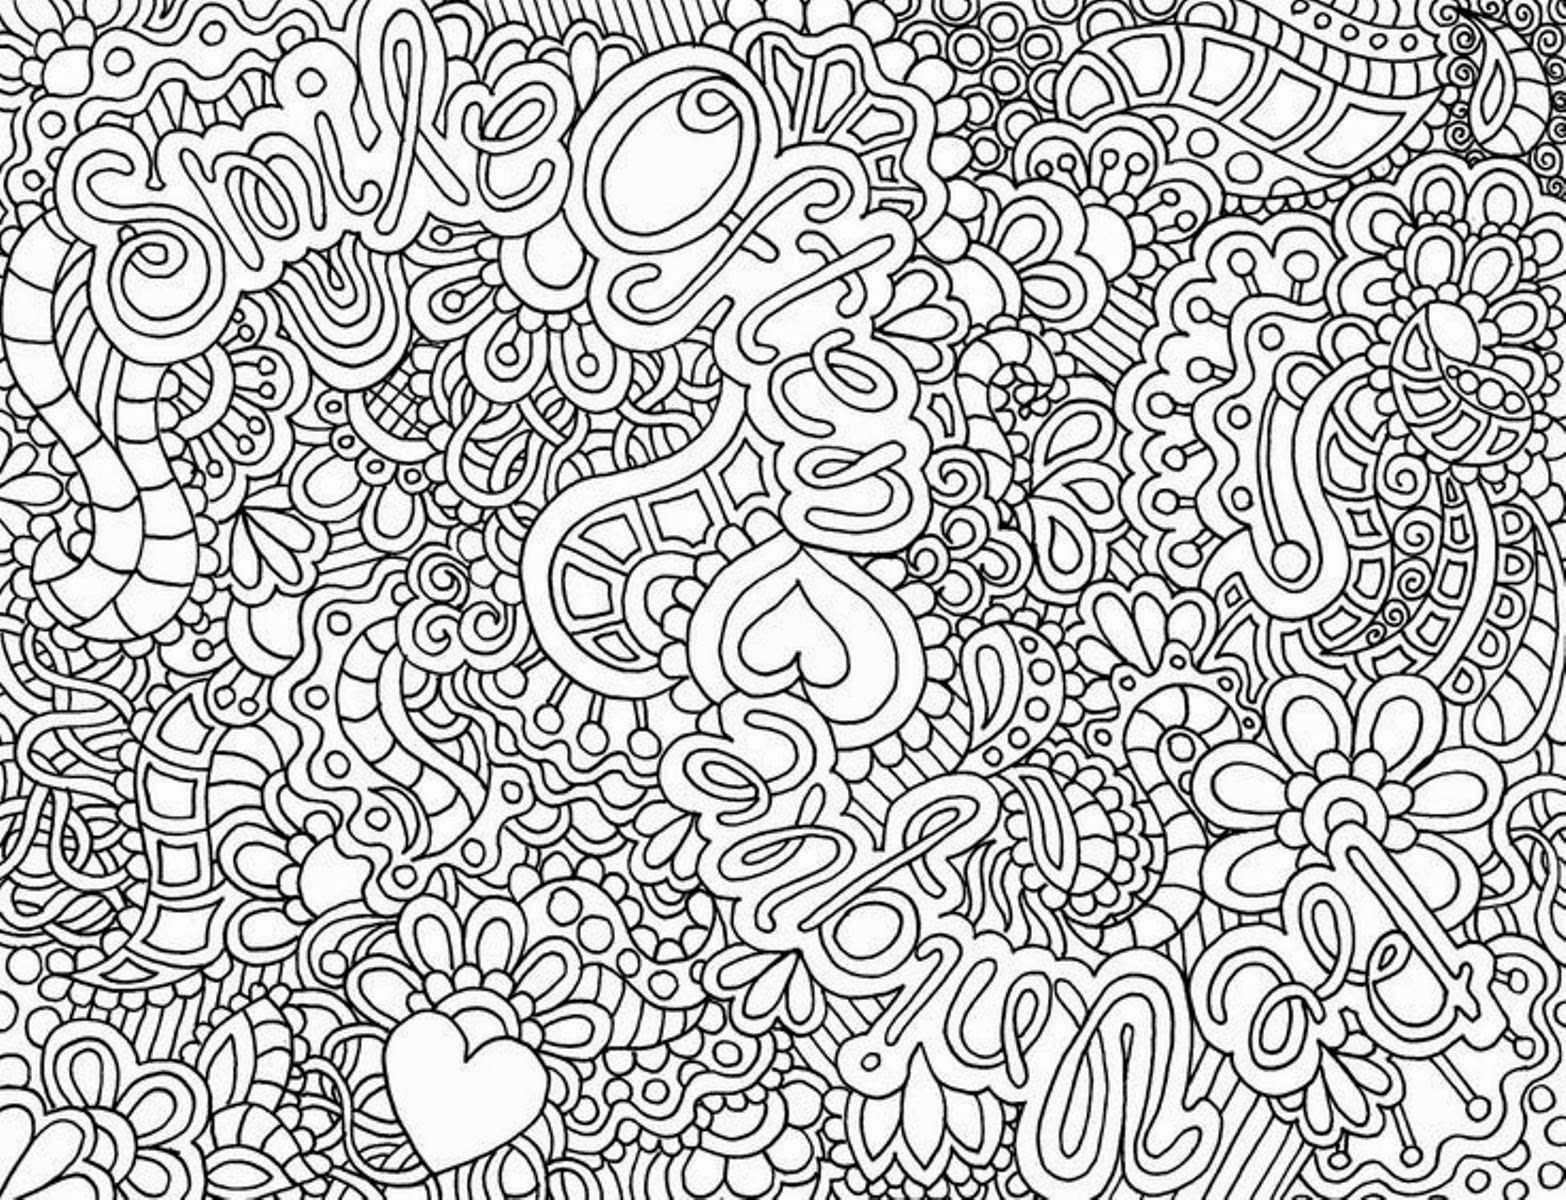 Coloring Pages: Difficult but Fun Coloring Pages Free and Printable